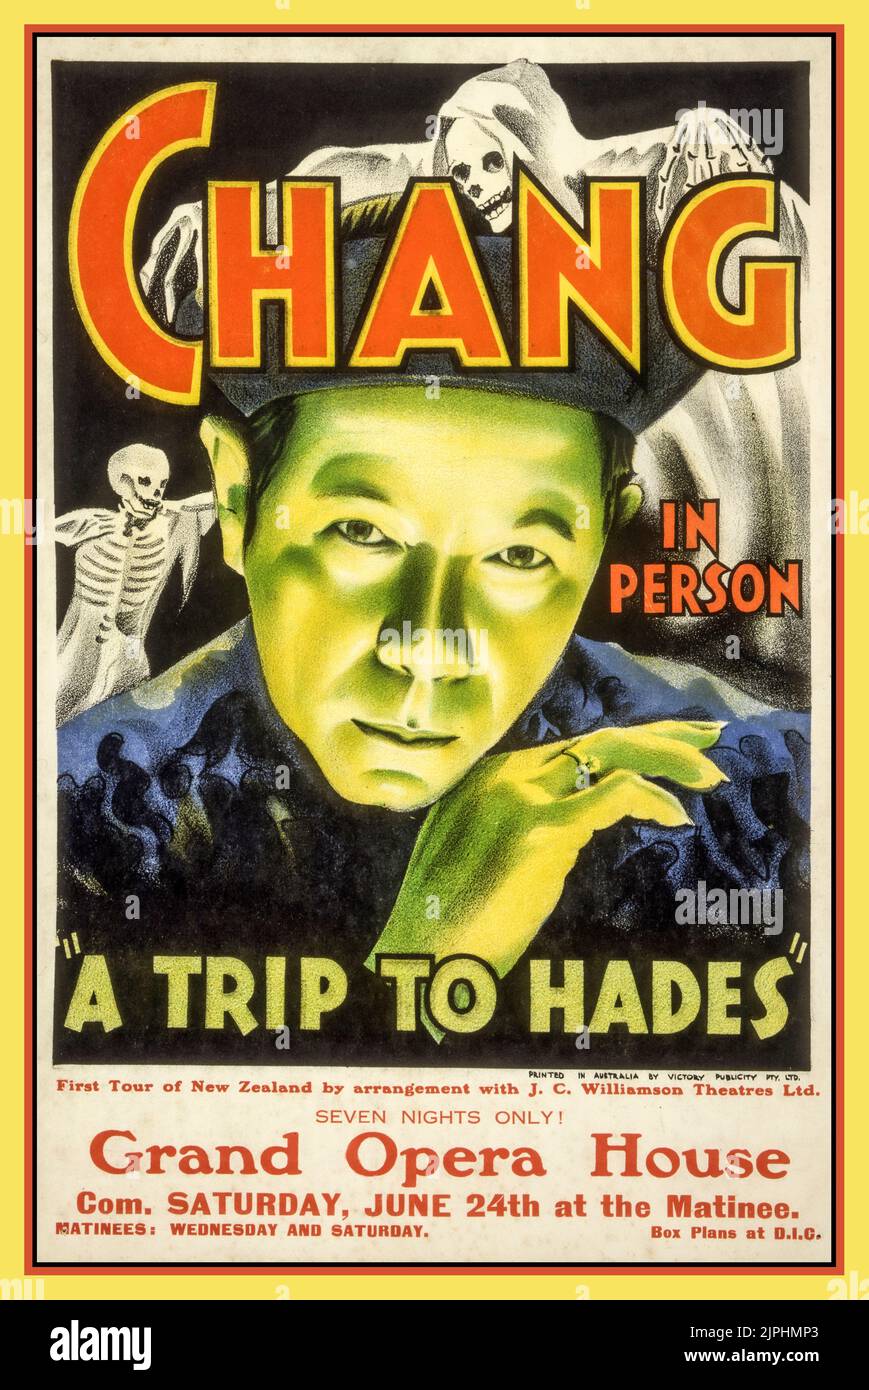 Vintage 1930s Theatre Poster 'CHANG in Person'  ''A trip to Hades' This poster is example of the rich colour of posters in the 1930s, and uses the technique of lighting the face from below, to convey the thrill and drama of a magic show, and suggest a dark mystery.  Reviews of the shows were enthusiastic about Chang’s marvellous sleight of hand with bowls of water and bowls of sand. Stock Photo